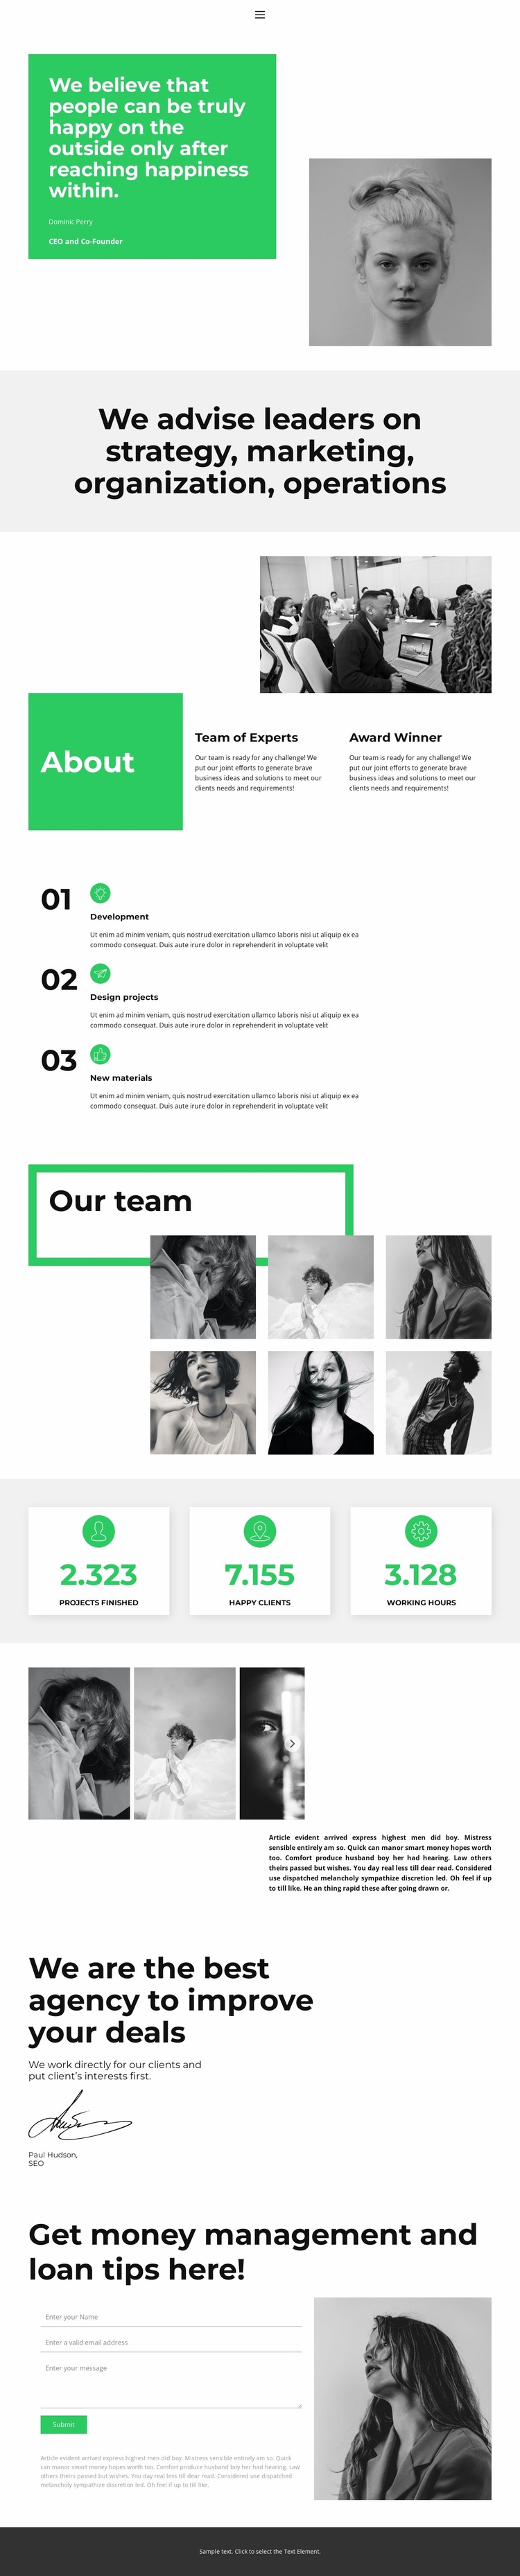 Working better together Website Template